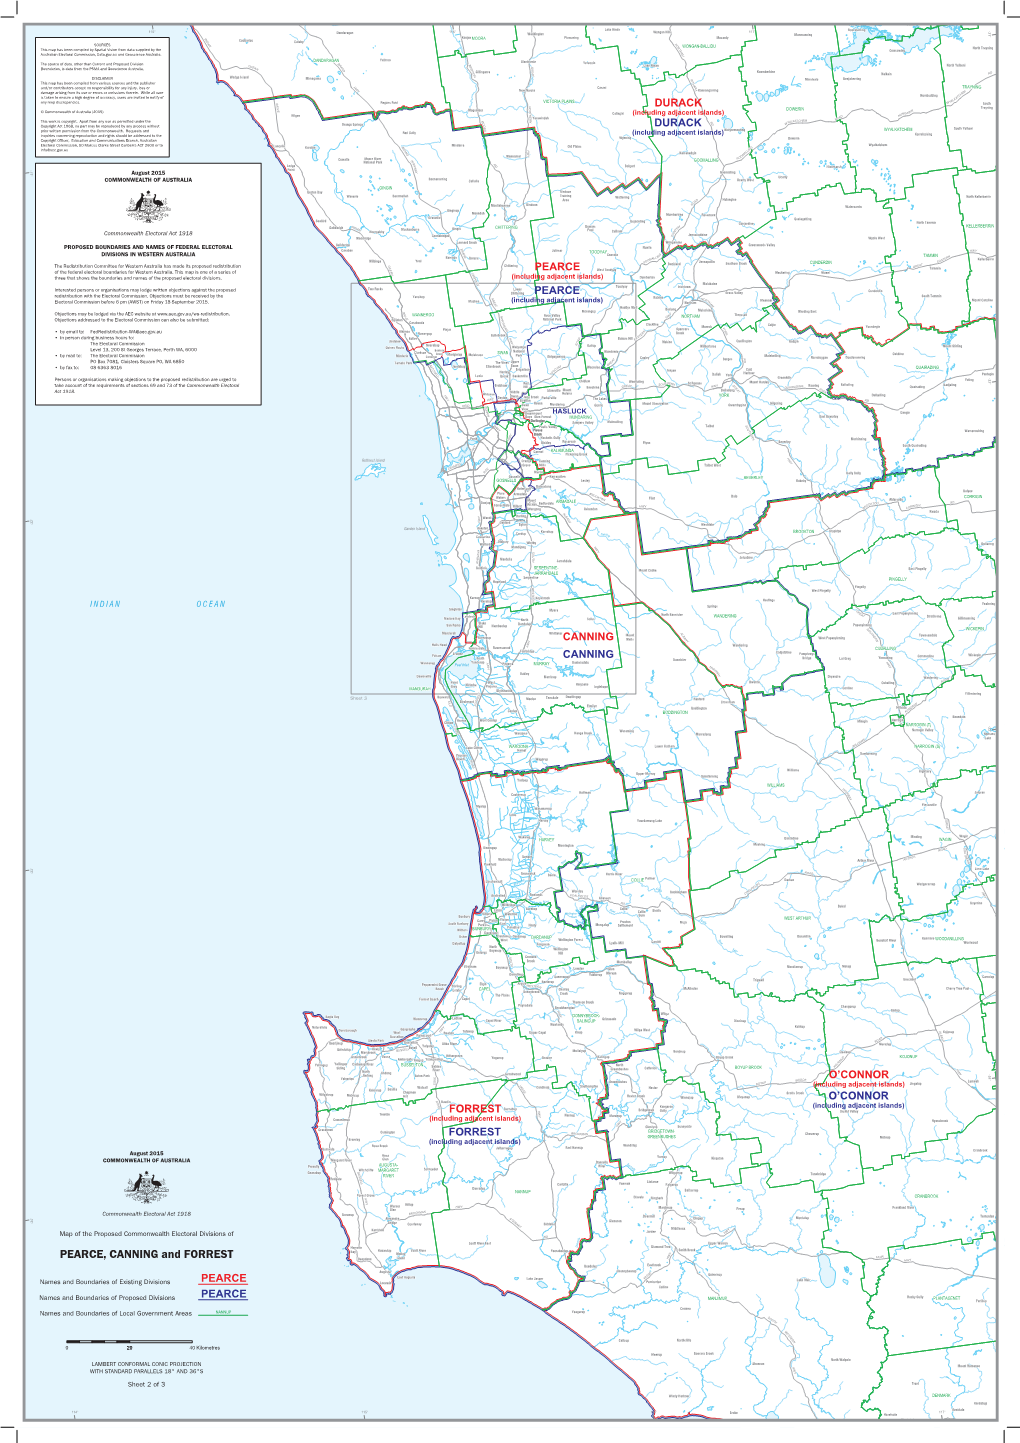 Proposed Federal Electoral Divisions of Pearce, Canning and Forrest